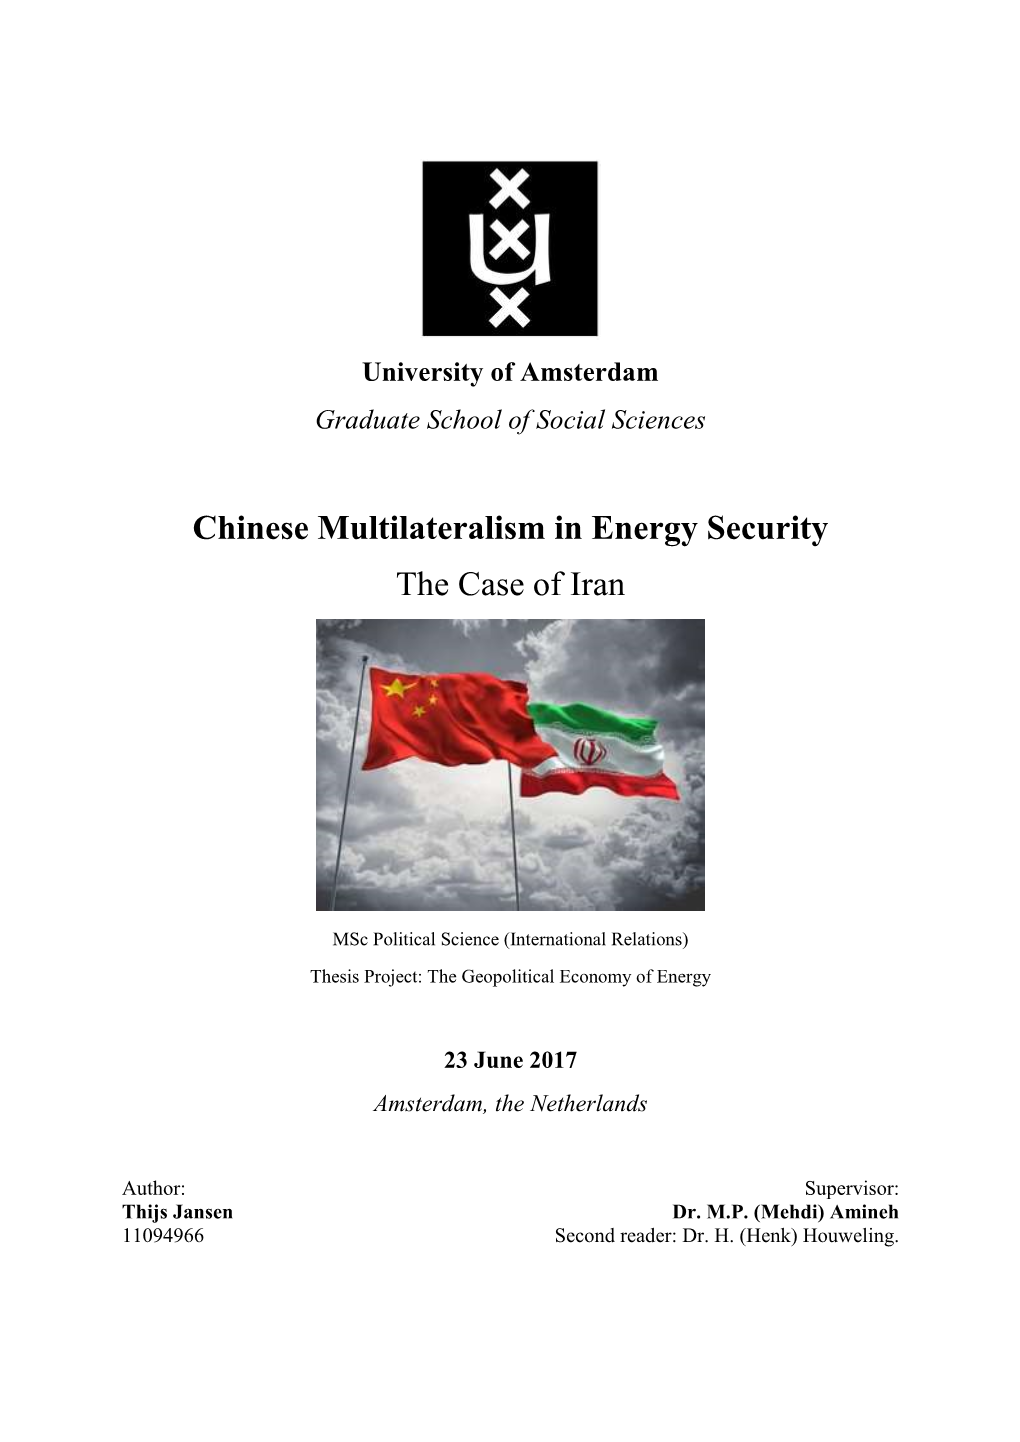 Chinese Multilateralism in Energy Security the Case of Iran